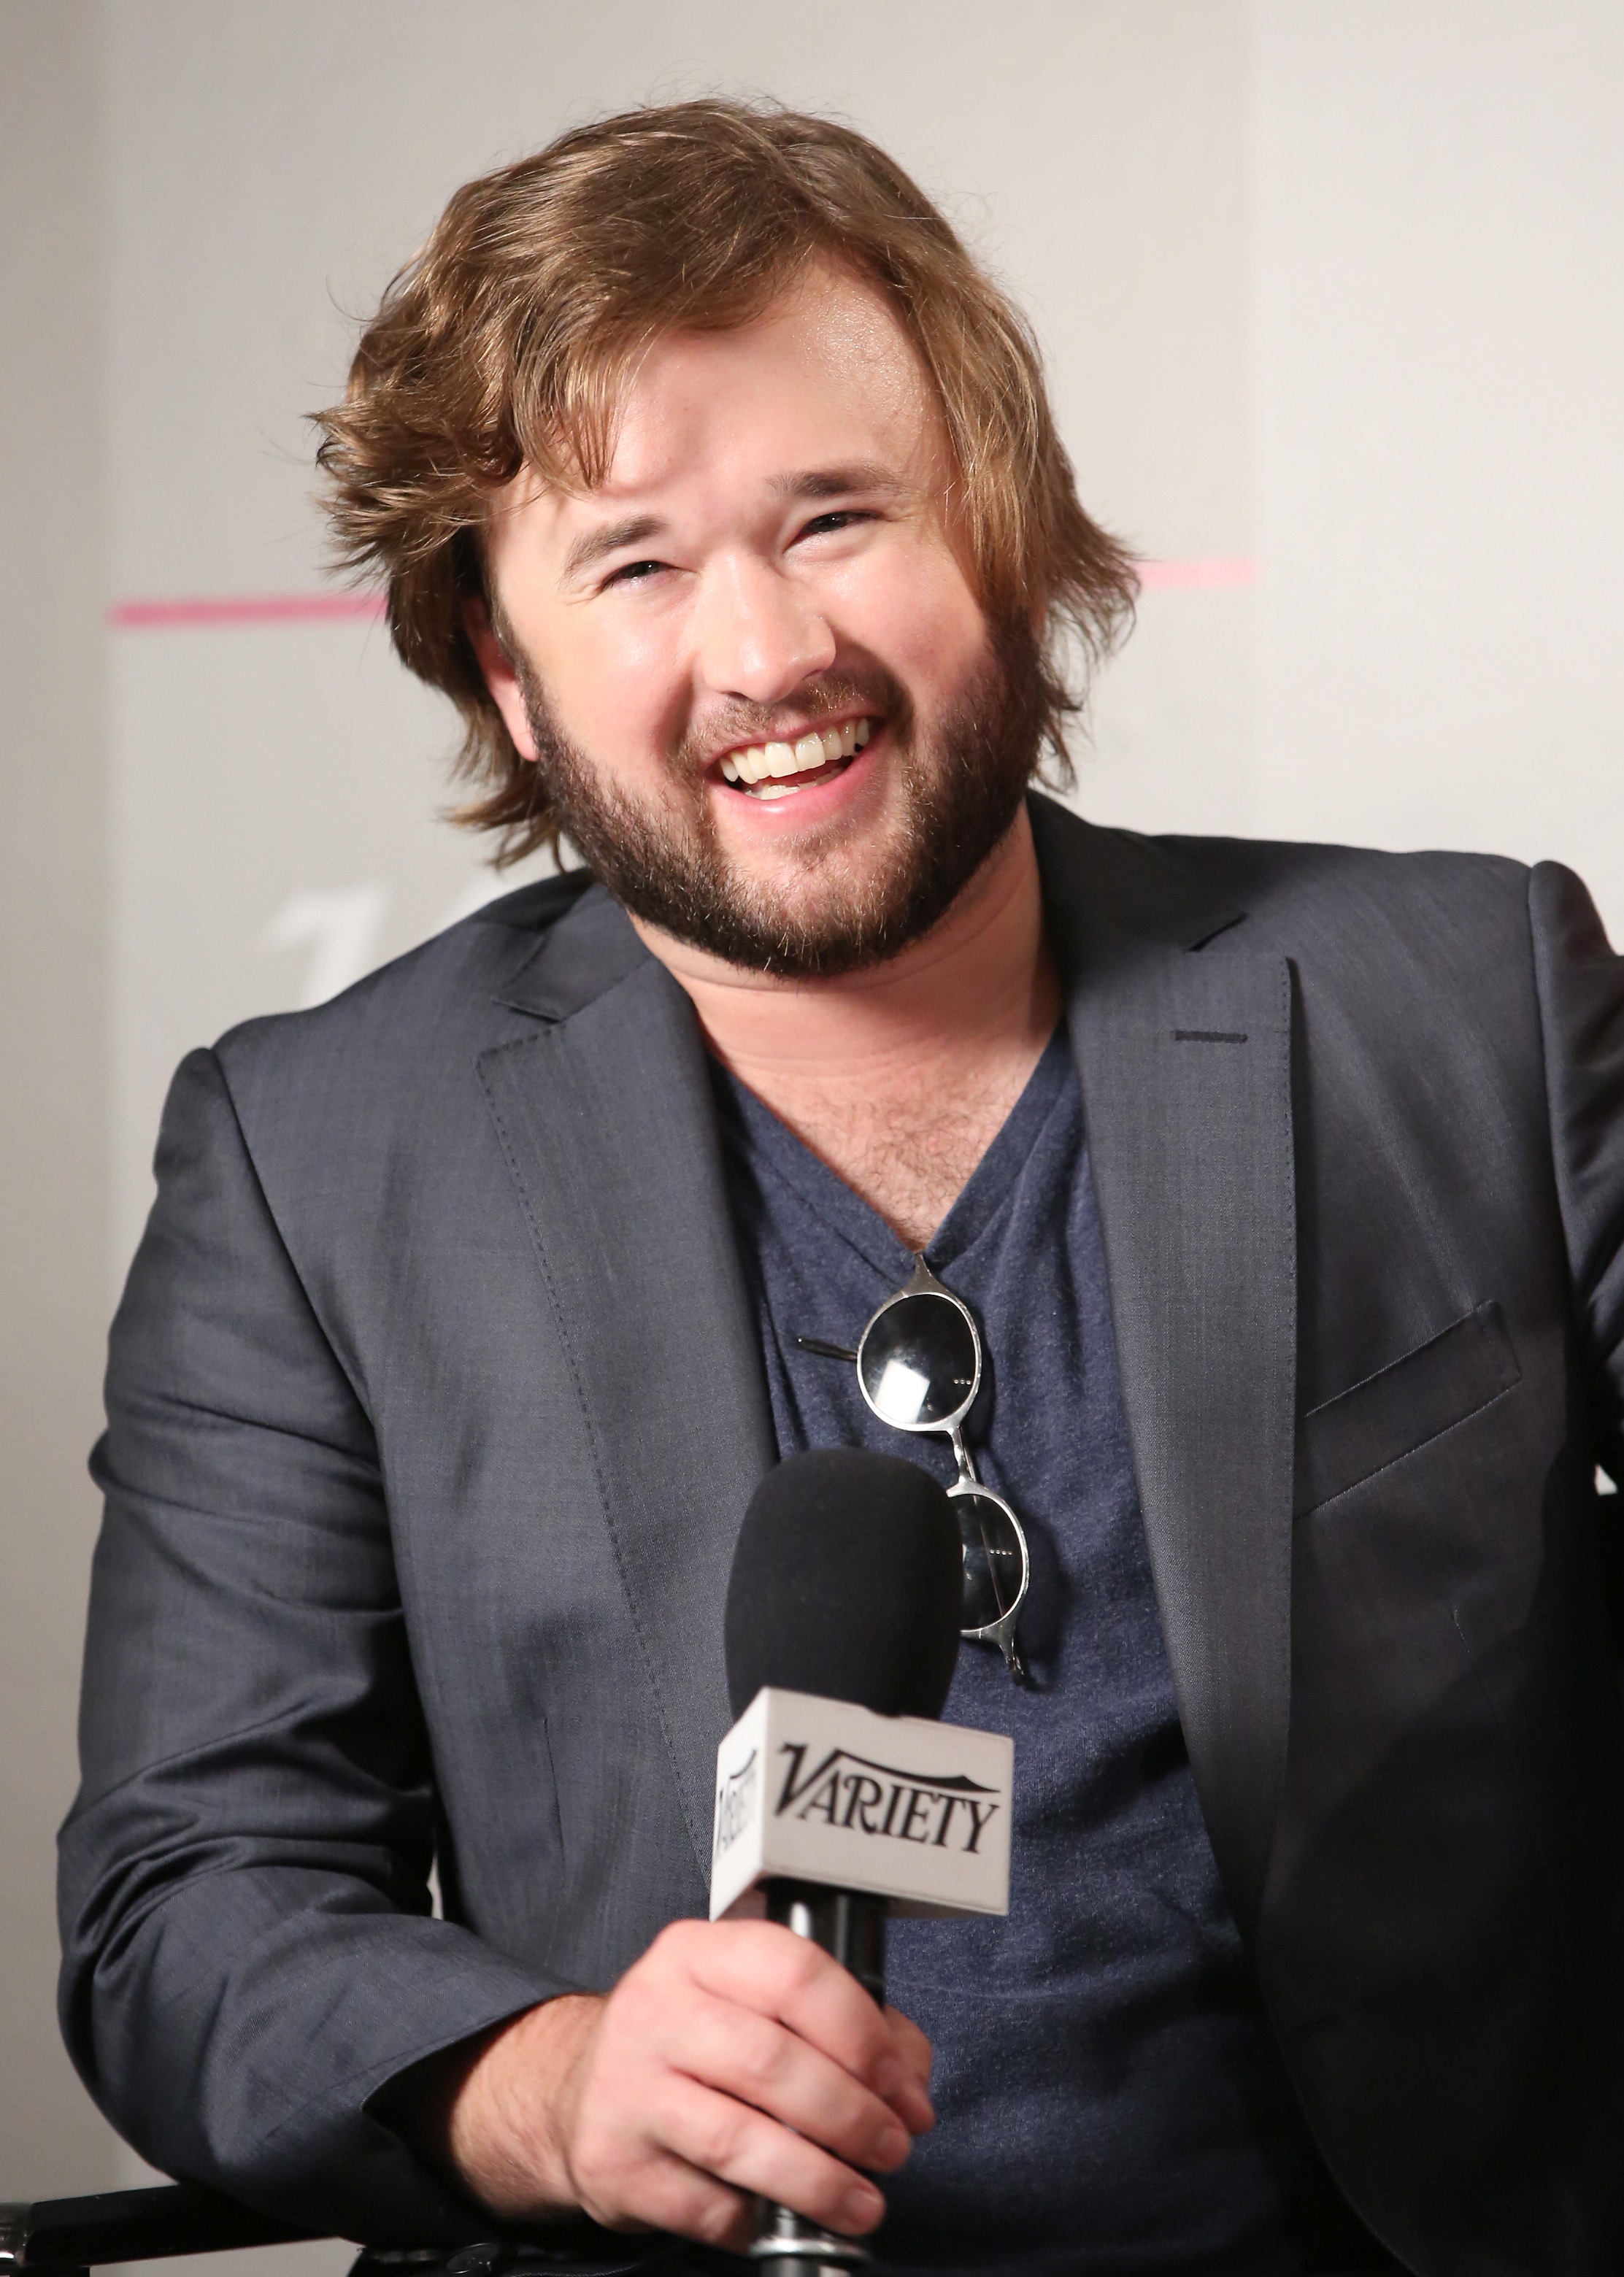 Haley Joel Osment In Sex Ed Proves The Sixth Sense Prodigy Is Dead